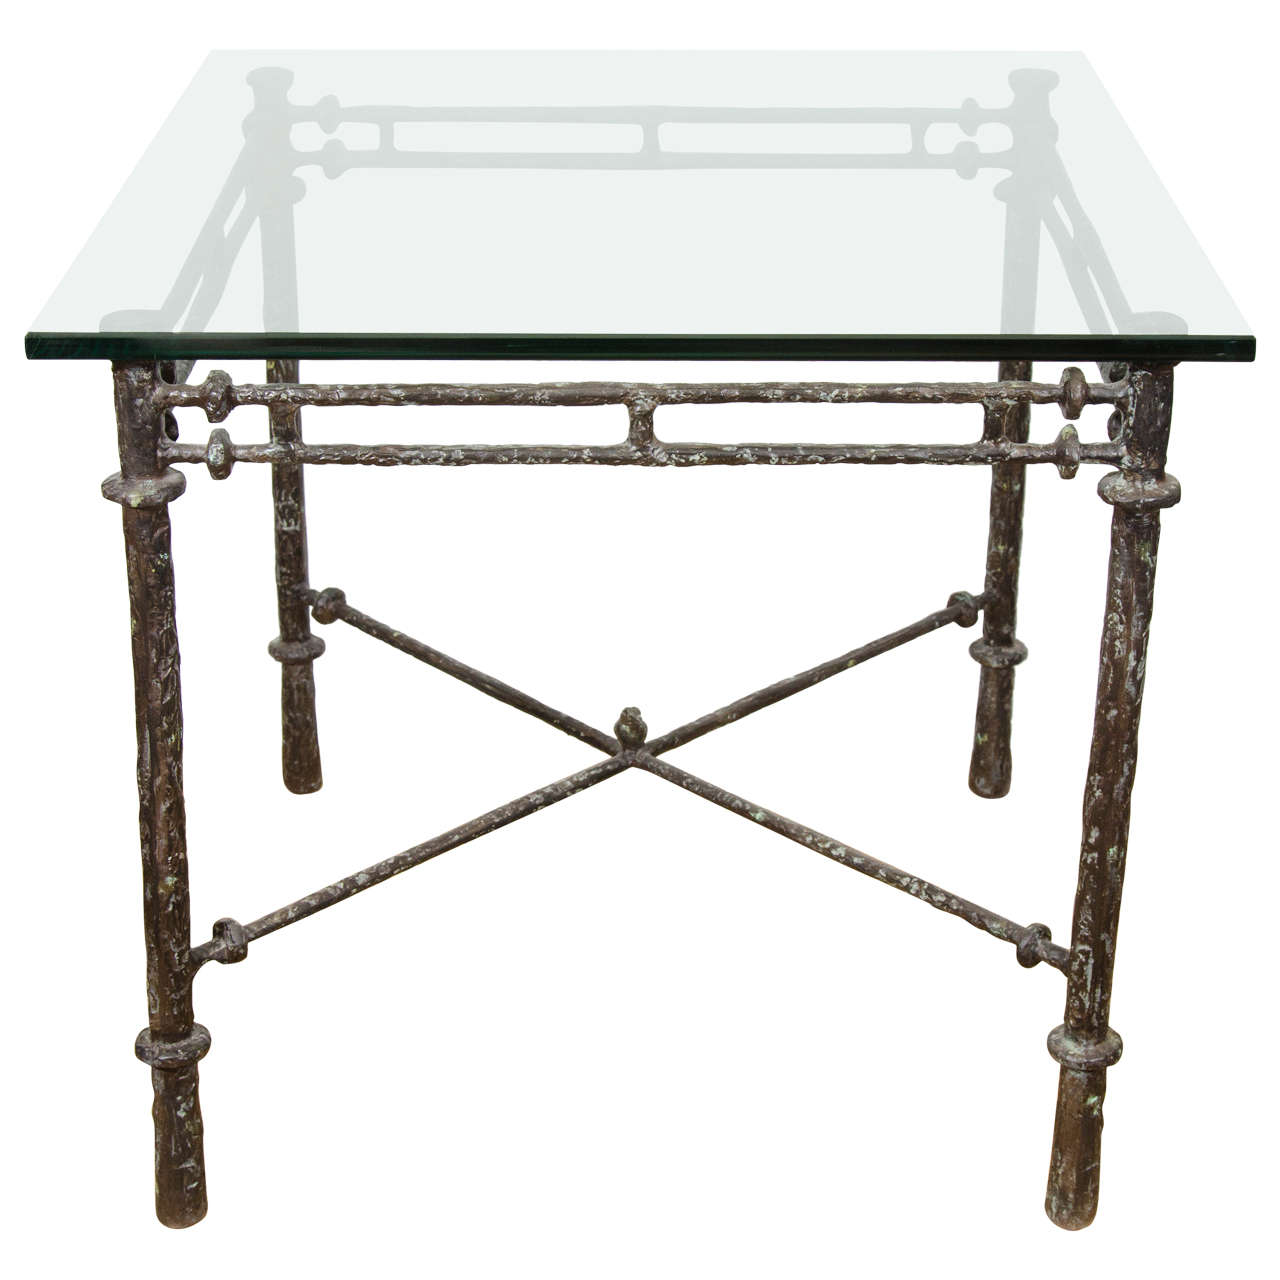 Midcentury Giacometti Inspired X-Base Table